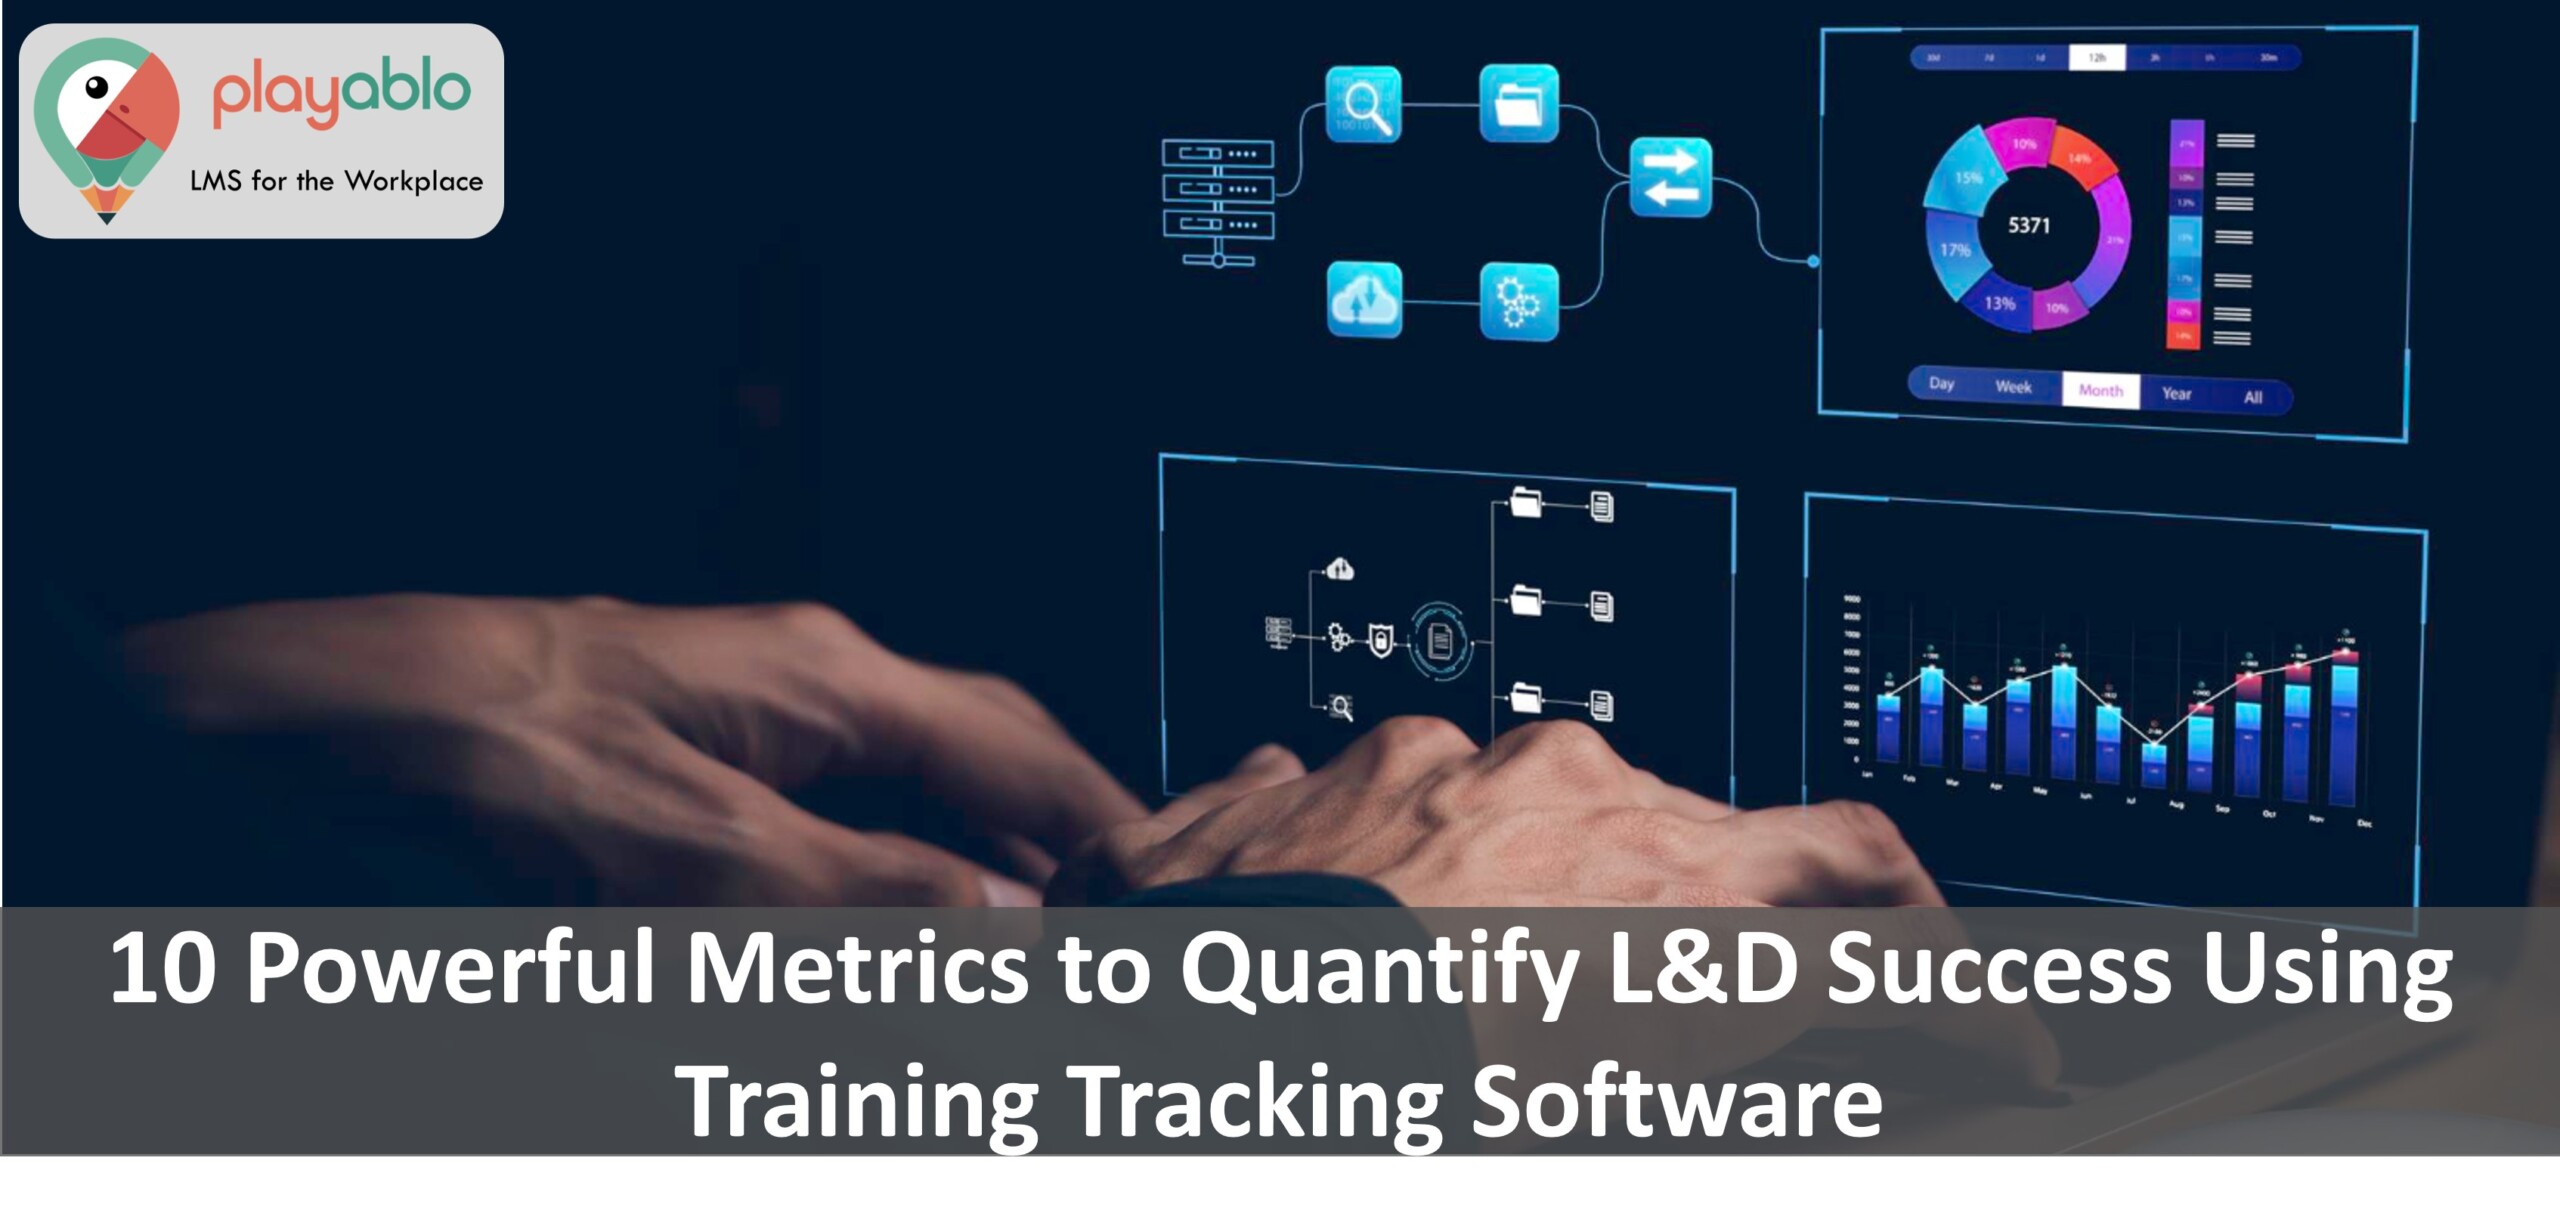 training-tracking-software